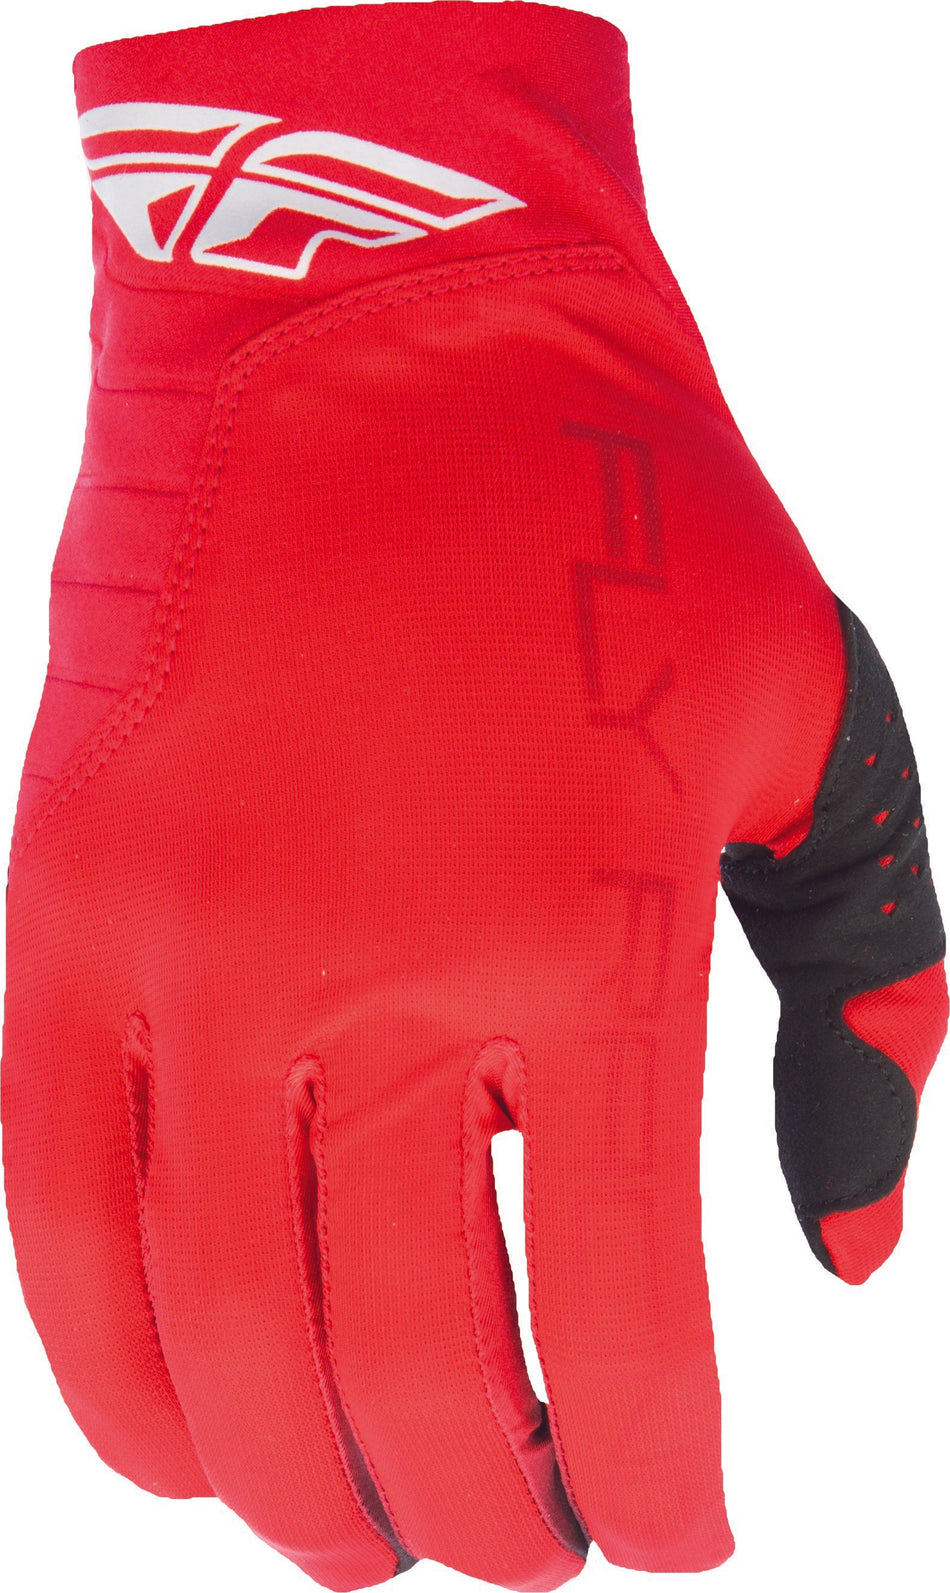 FLY RACING Pro Lite Glove Red Sz 10 L 370-81210